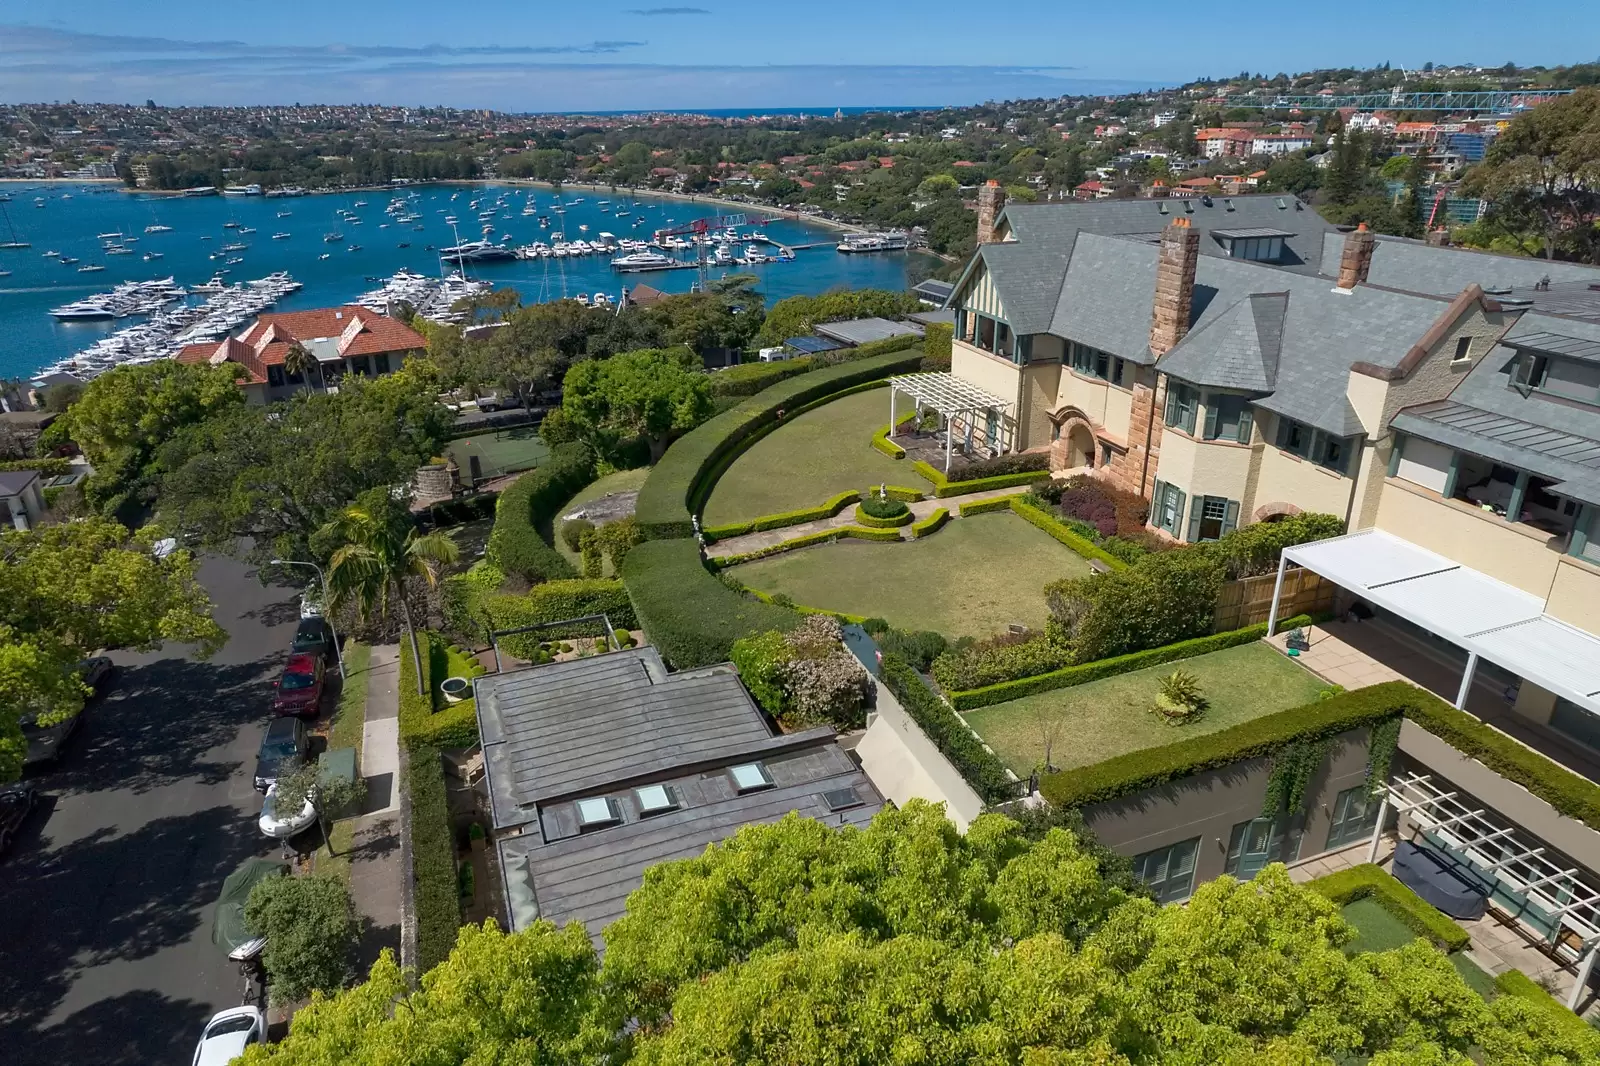 Photo #3: 6B Wentworth Street, Point Piper - Sold by Sydney Sotheby's International Realty